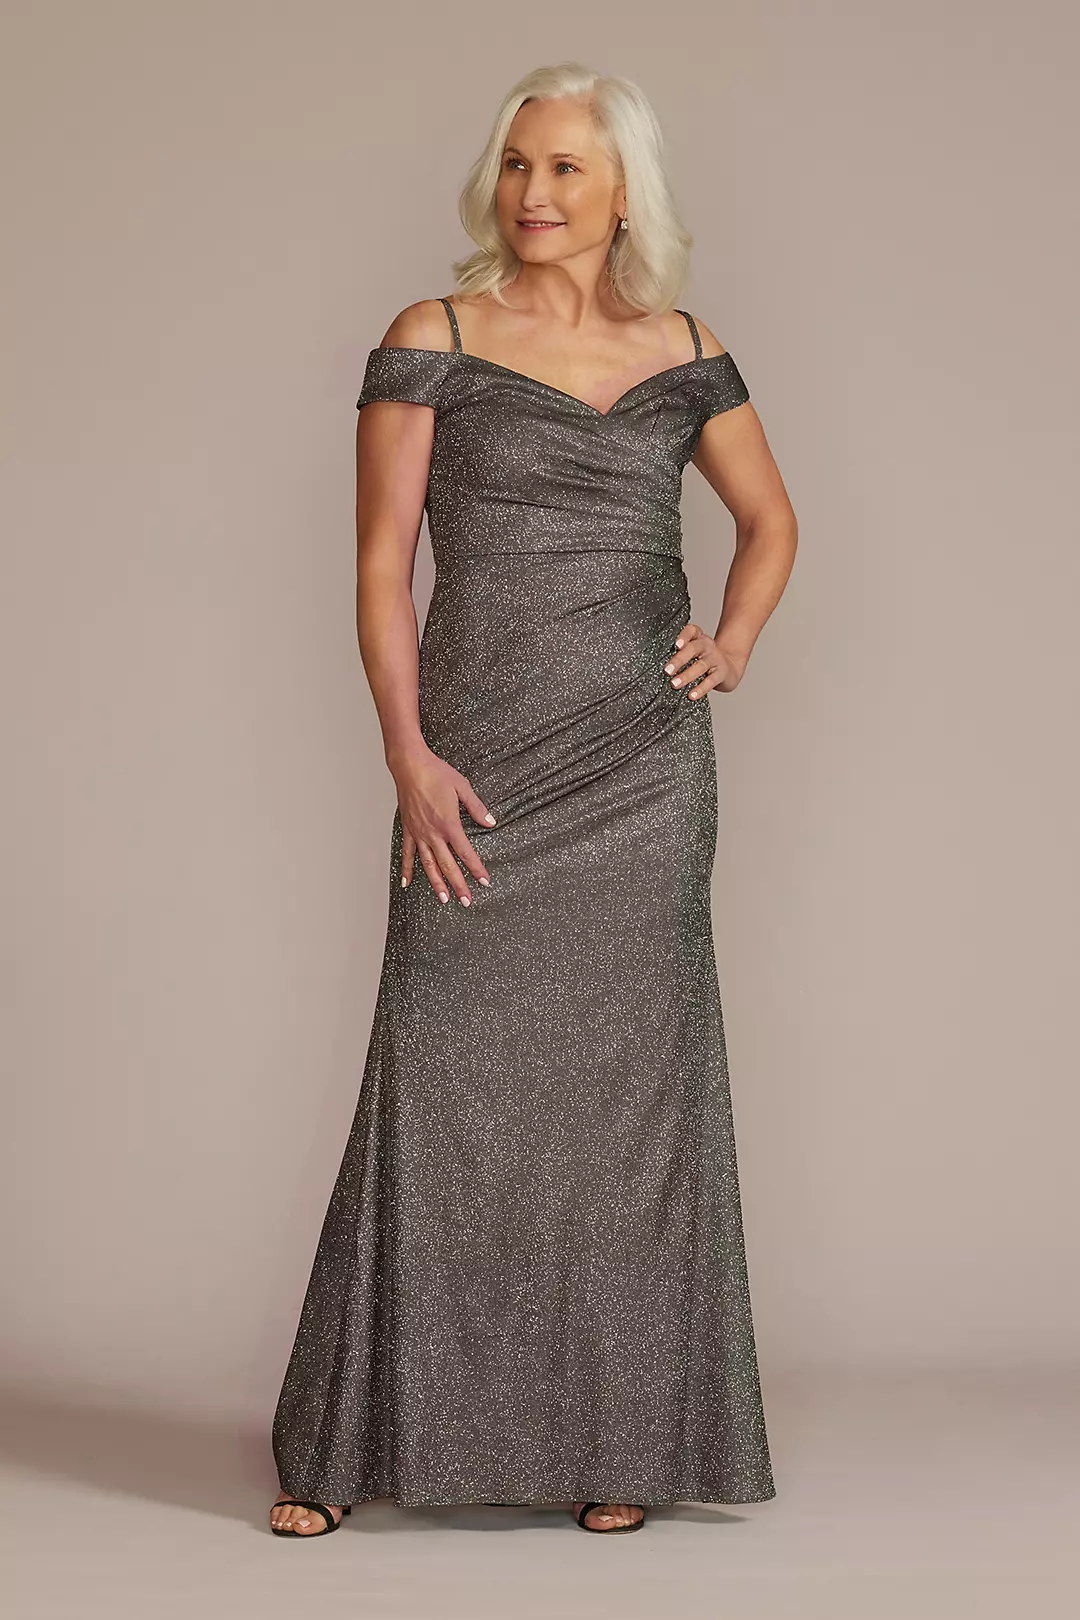 Off-the-Shoulder Metallic Sheath Gown Image